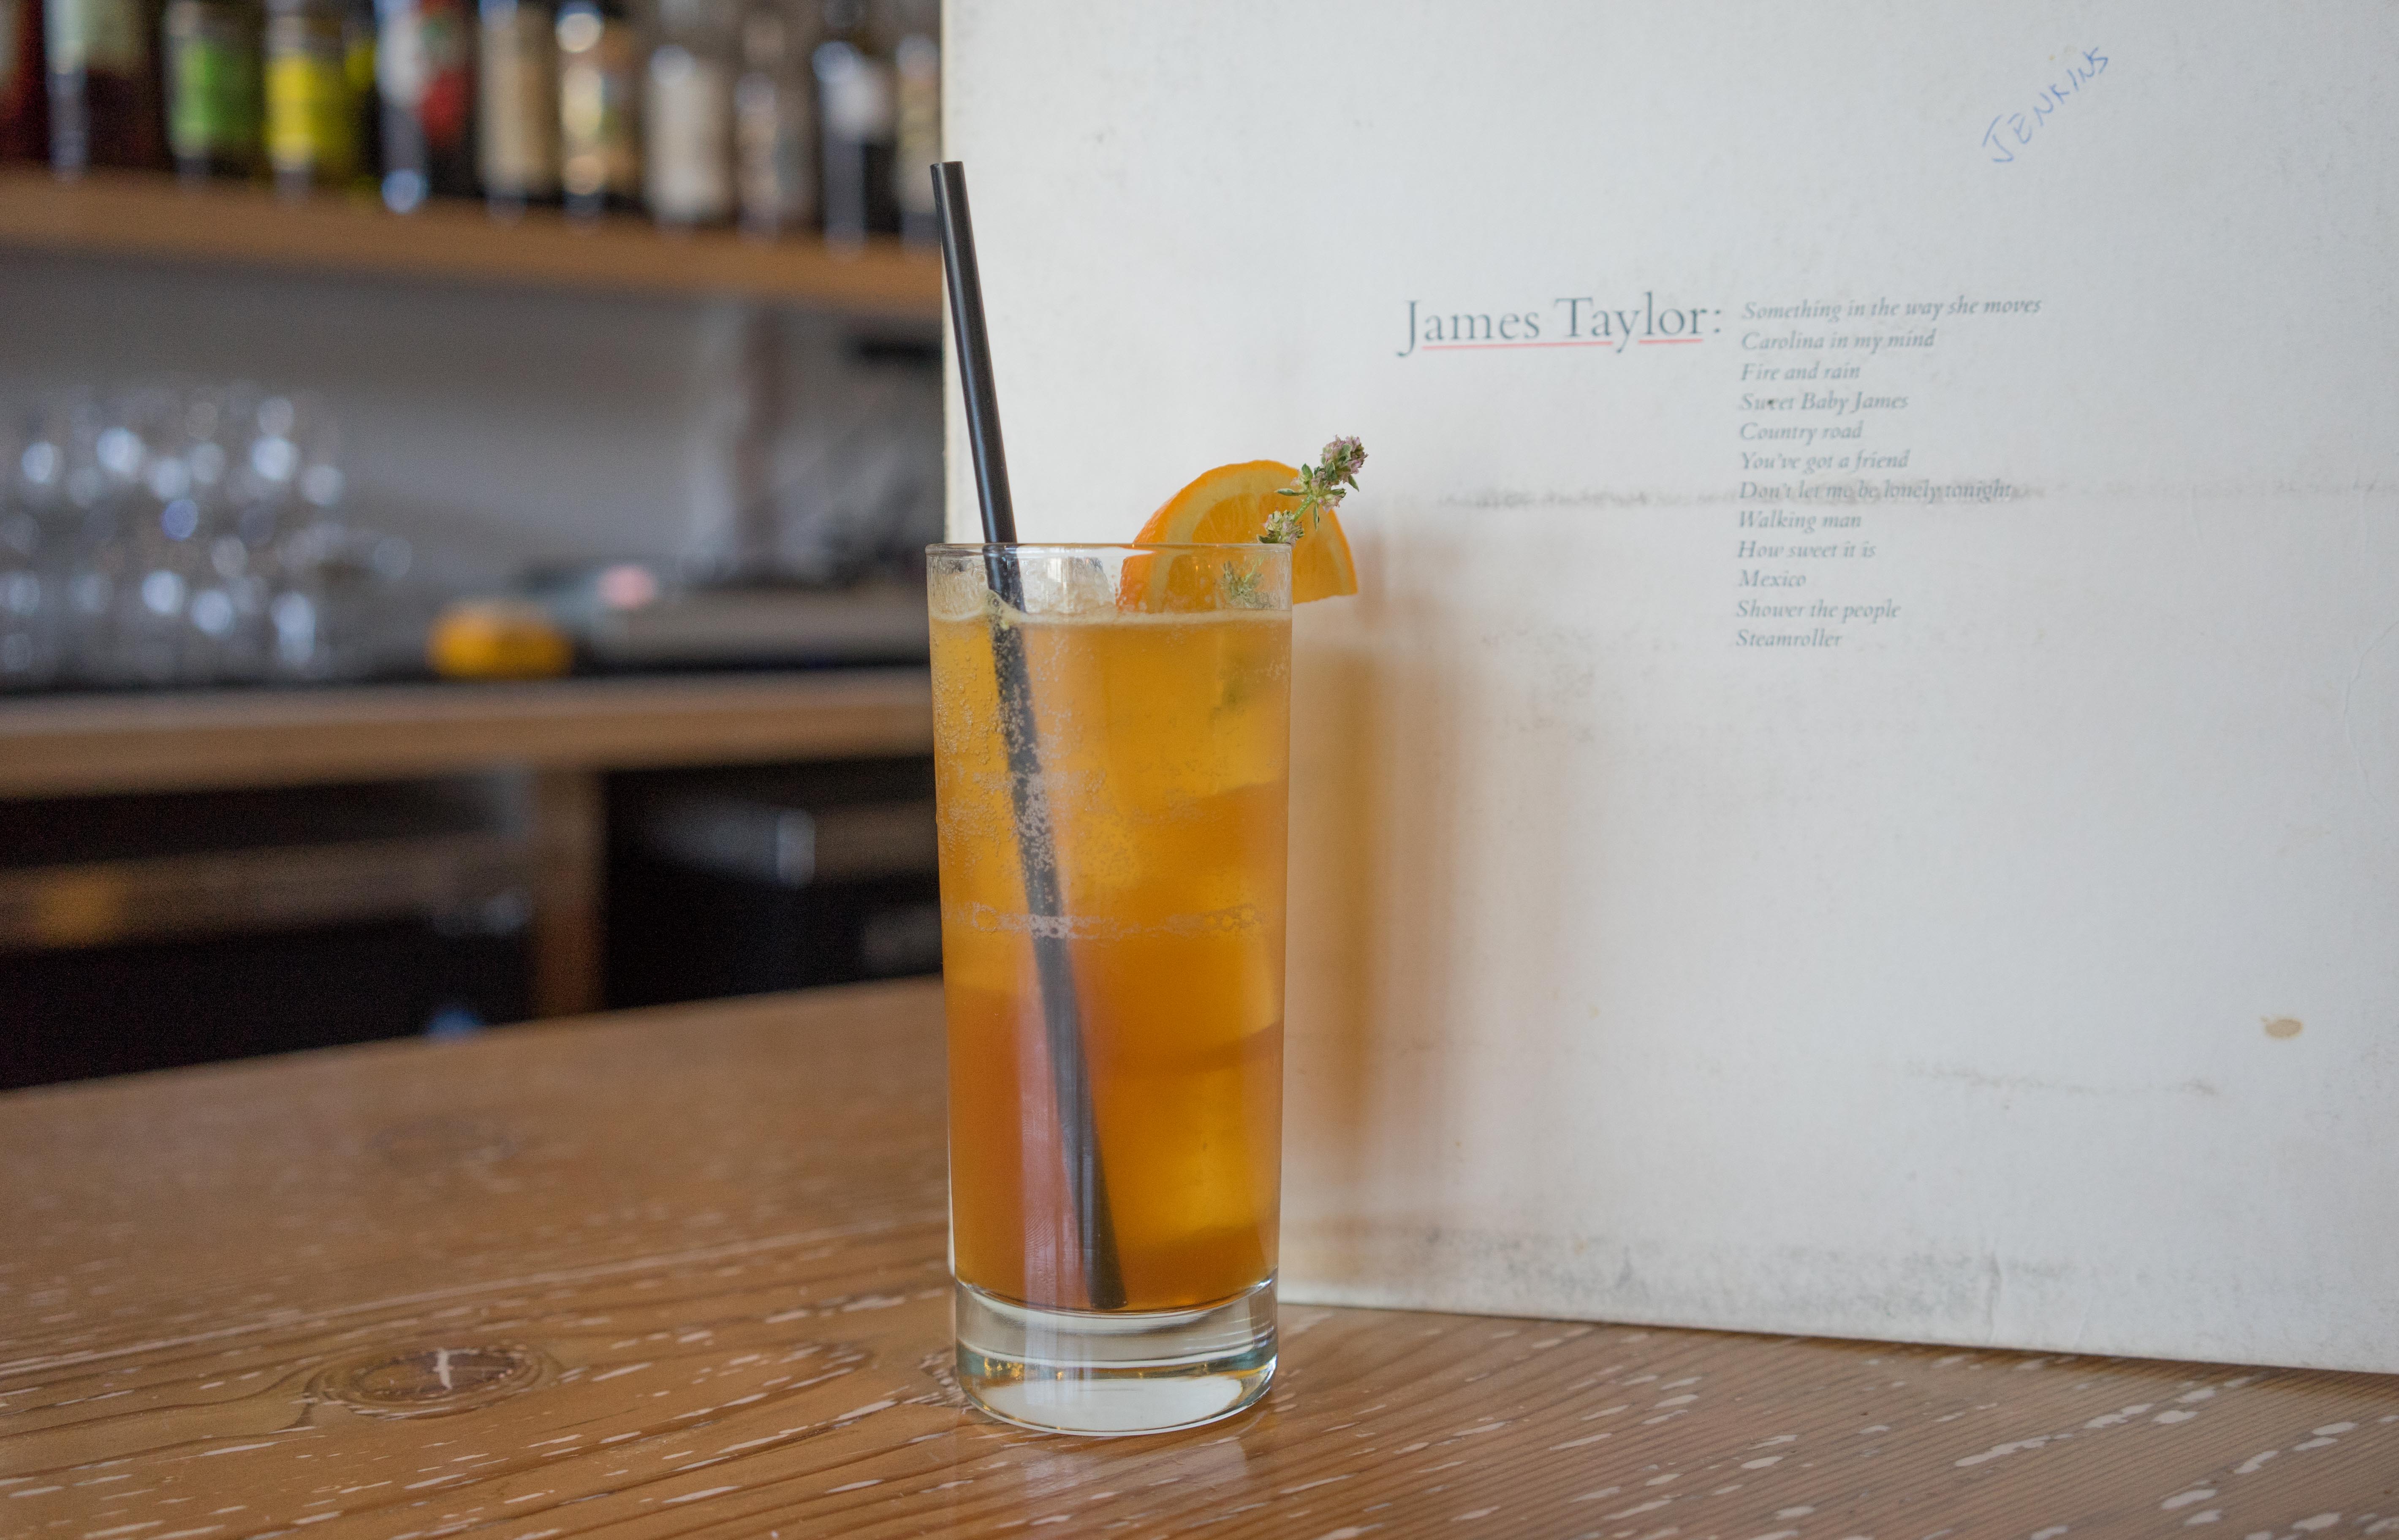 Pimm's Cup Variation Special with James Taylor Vinyl